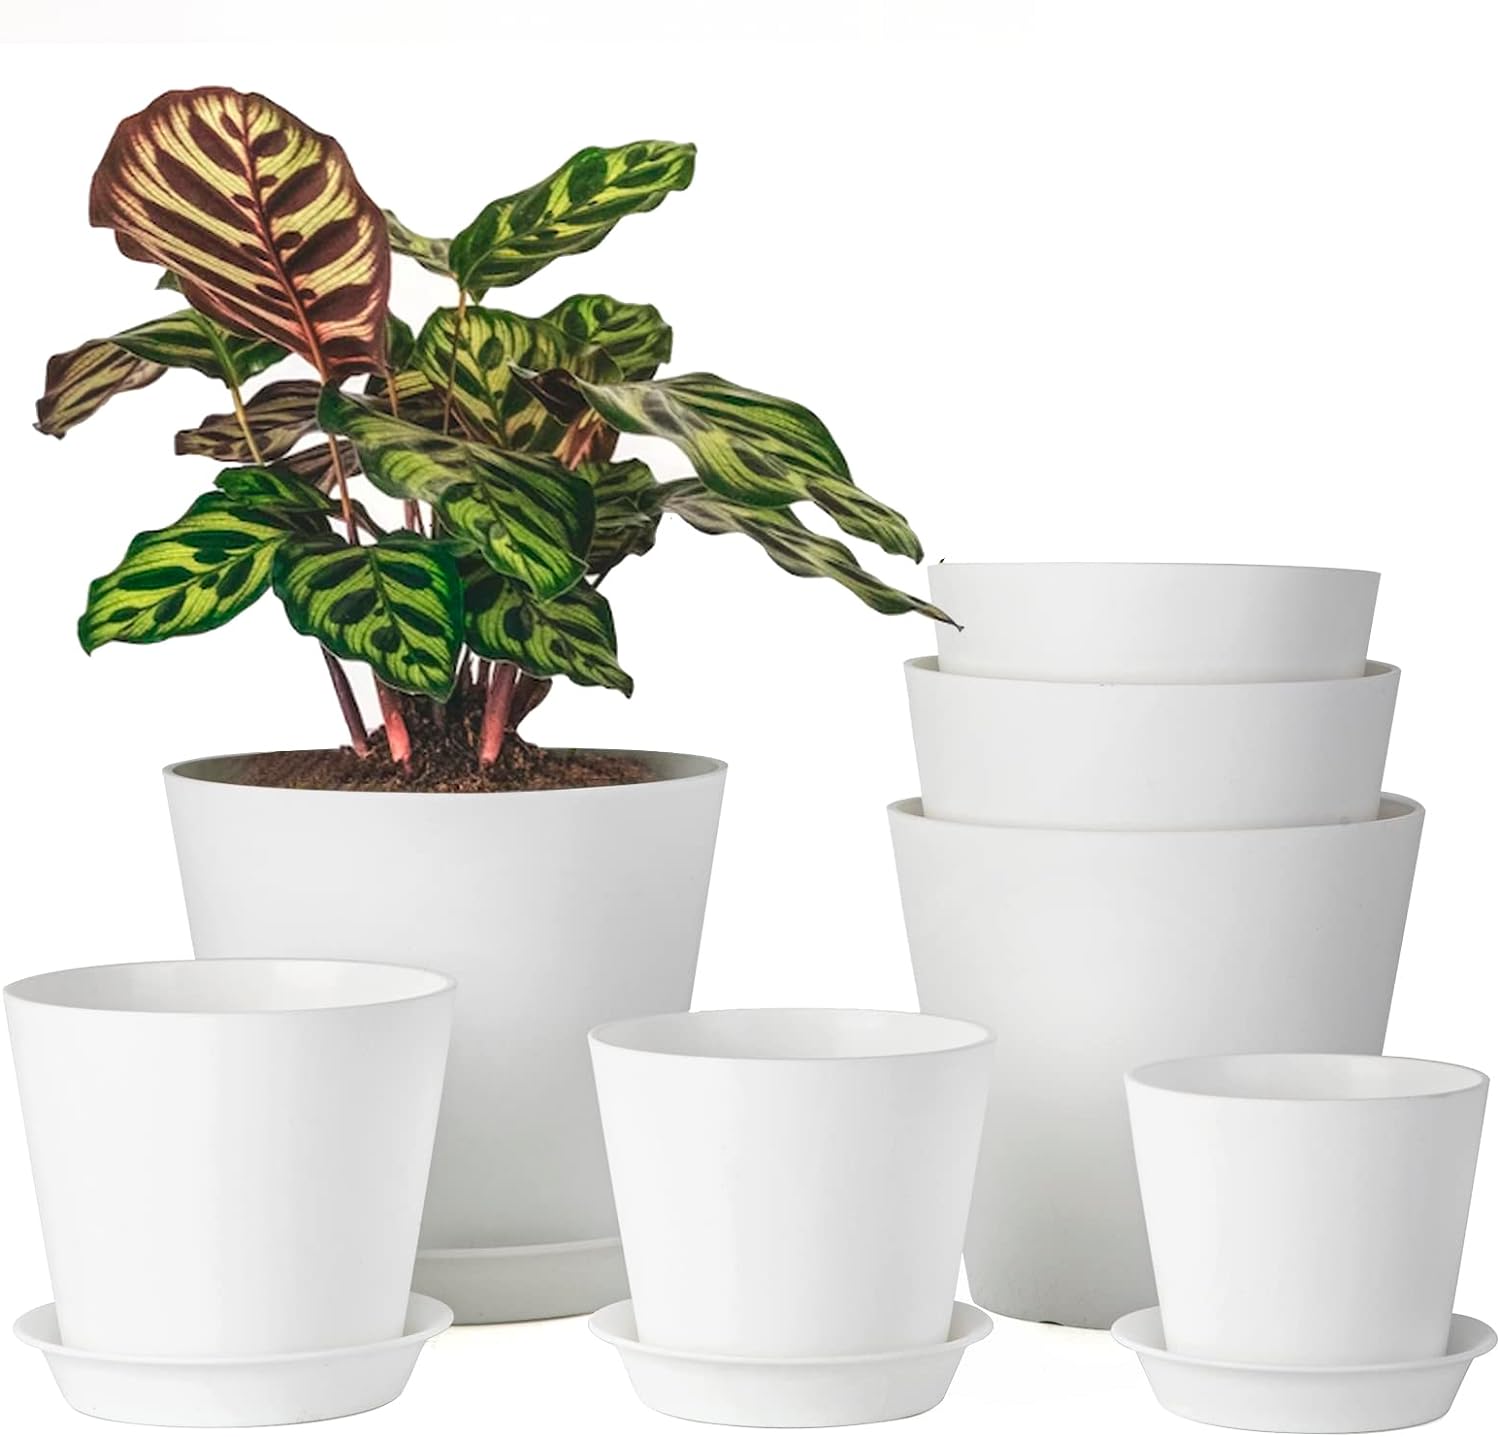 LaDoVita 7 Pack Plastic Plant Pots Indoor, 7/6.5/6/5.5/5/4.5/4 Inch Modern Planters for Plants, Flower Pots with Drainage Holes and Trays, White